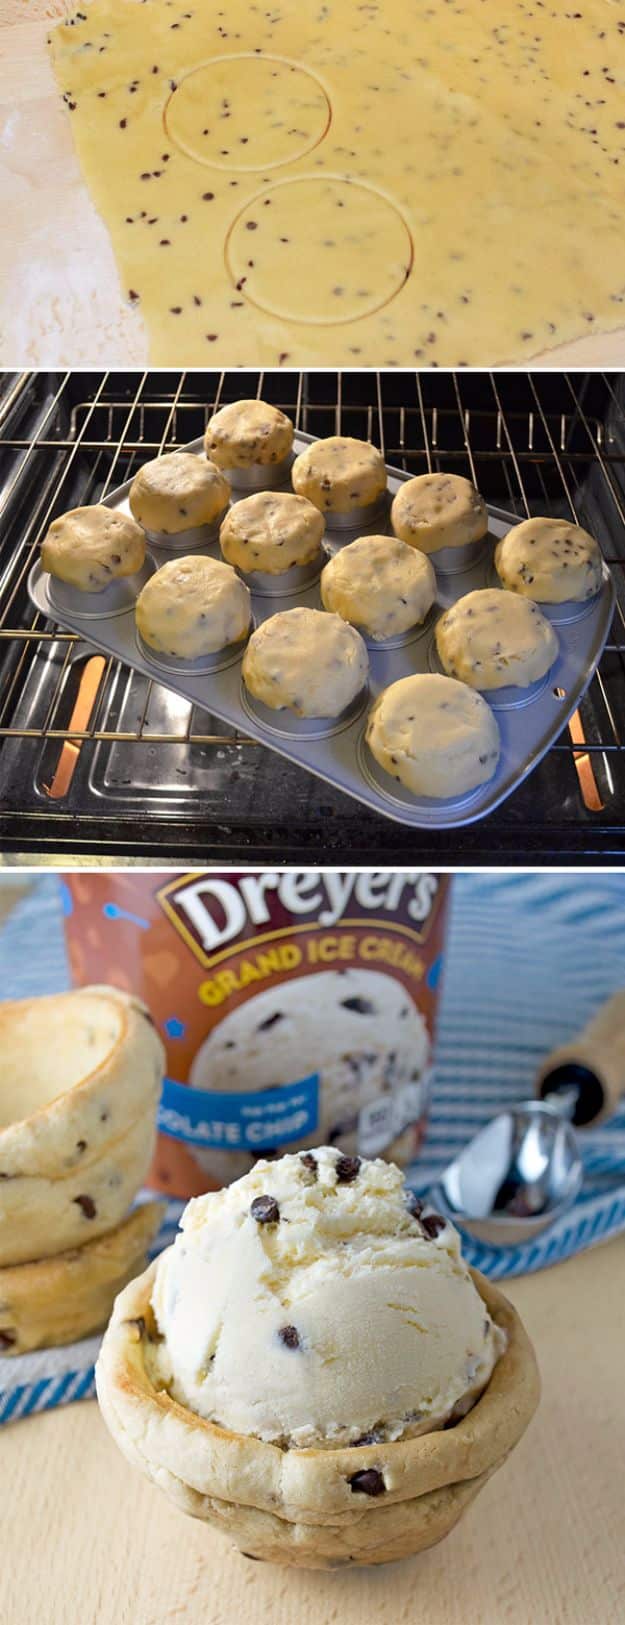 Baking Hacks - Create Edible Cookie Bowls - A List of Easy Hacks For Your Favorite Baking Recipes - Simple Tips and Tricks To Use When You Bake - Quick Ways to Bake Cake, Cupcakes, Desserts and Cookies - Best Kitchen Lifehacks for Bakers Favorite DIY Recipe 